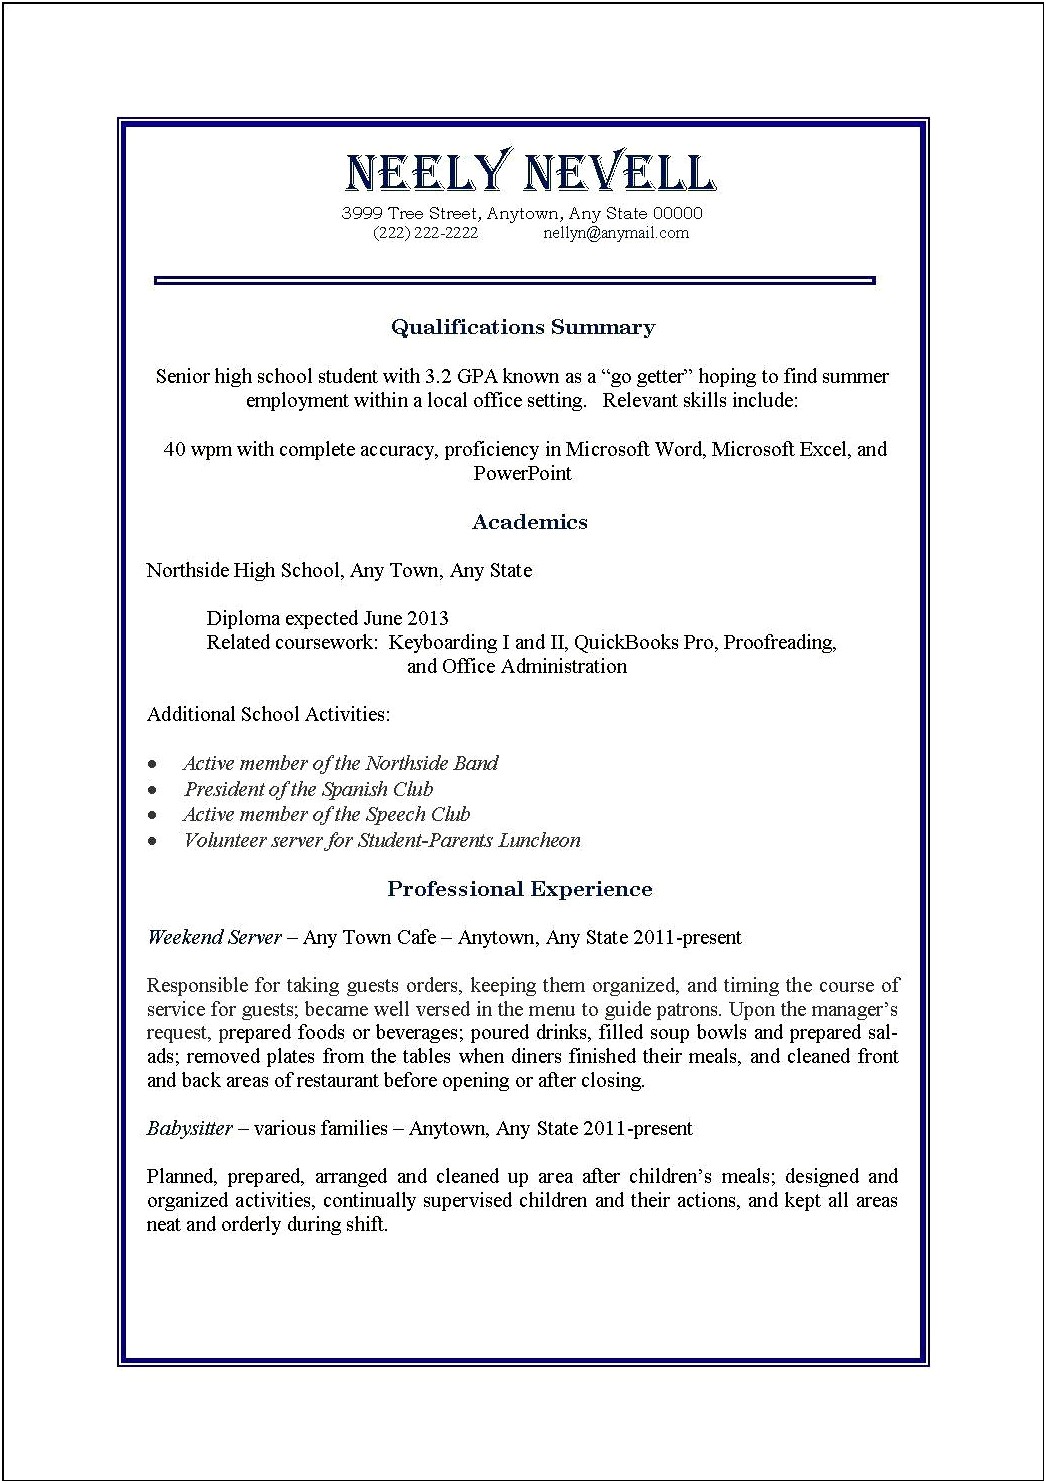 Examples Of Good Basic Resumes